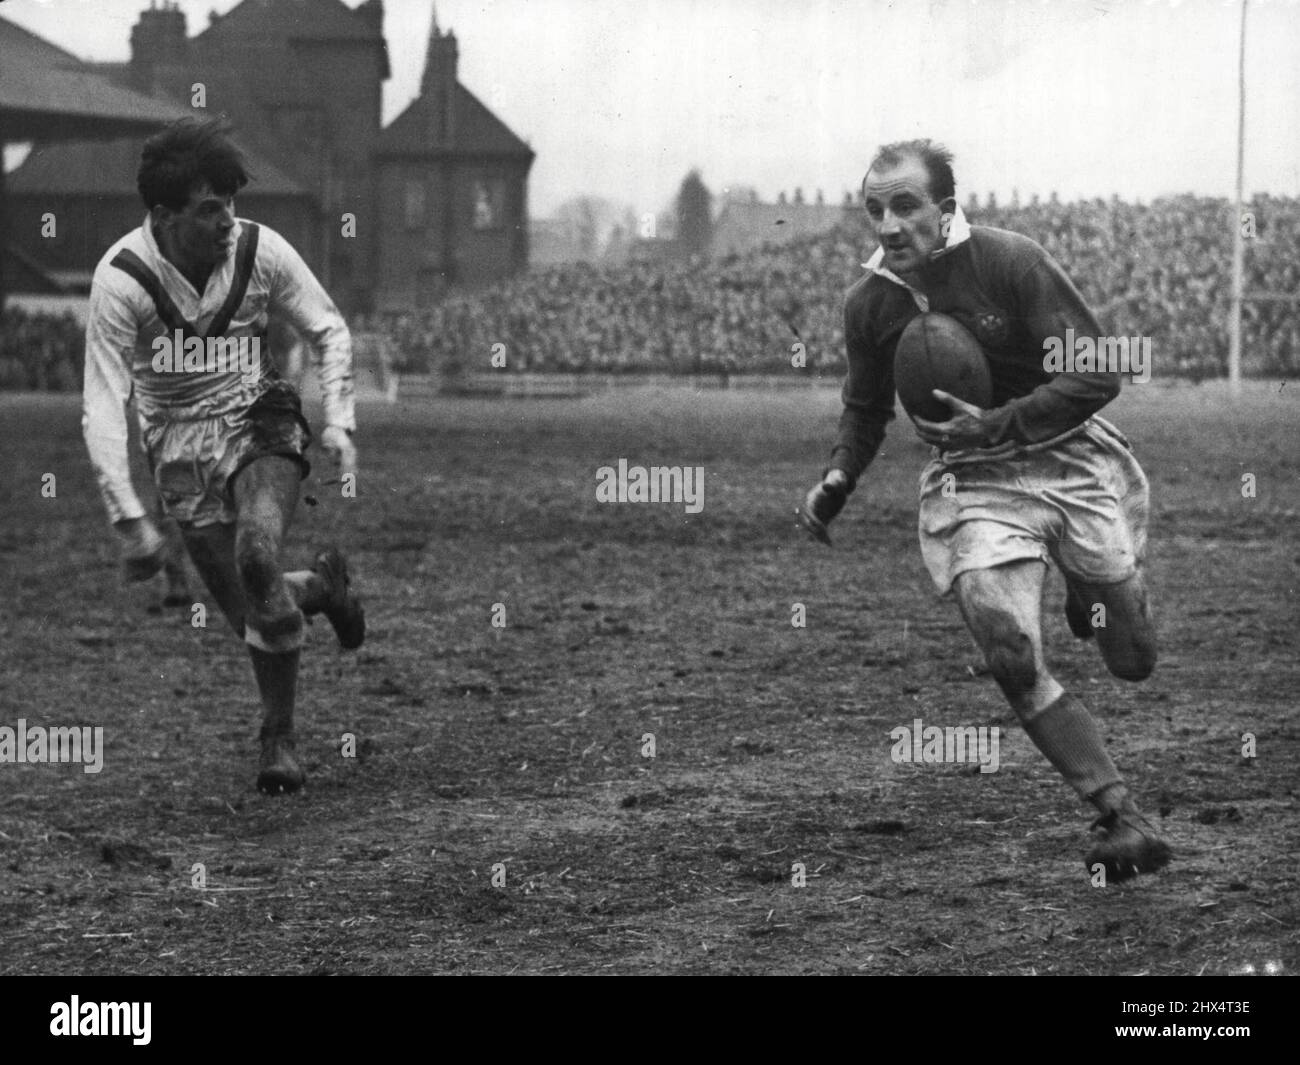 Leeds Rugby League centre Lewis Jones, makes a dash during a recent trial game. Former Rugby Union player, who was in Australia with the 1950 British team, Jones could gain a place in the League team to tour Australia this year. March 09, 1954. Stock Photo